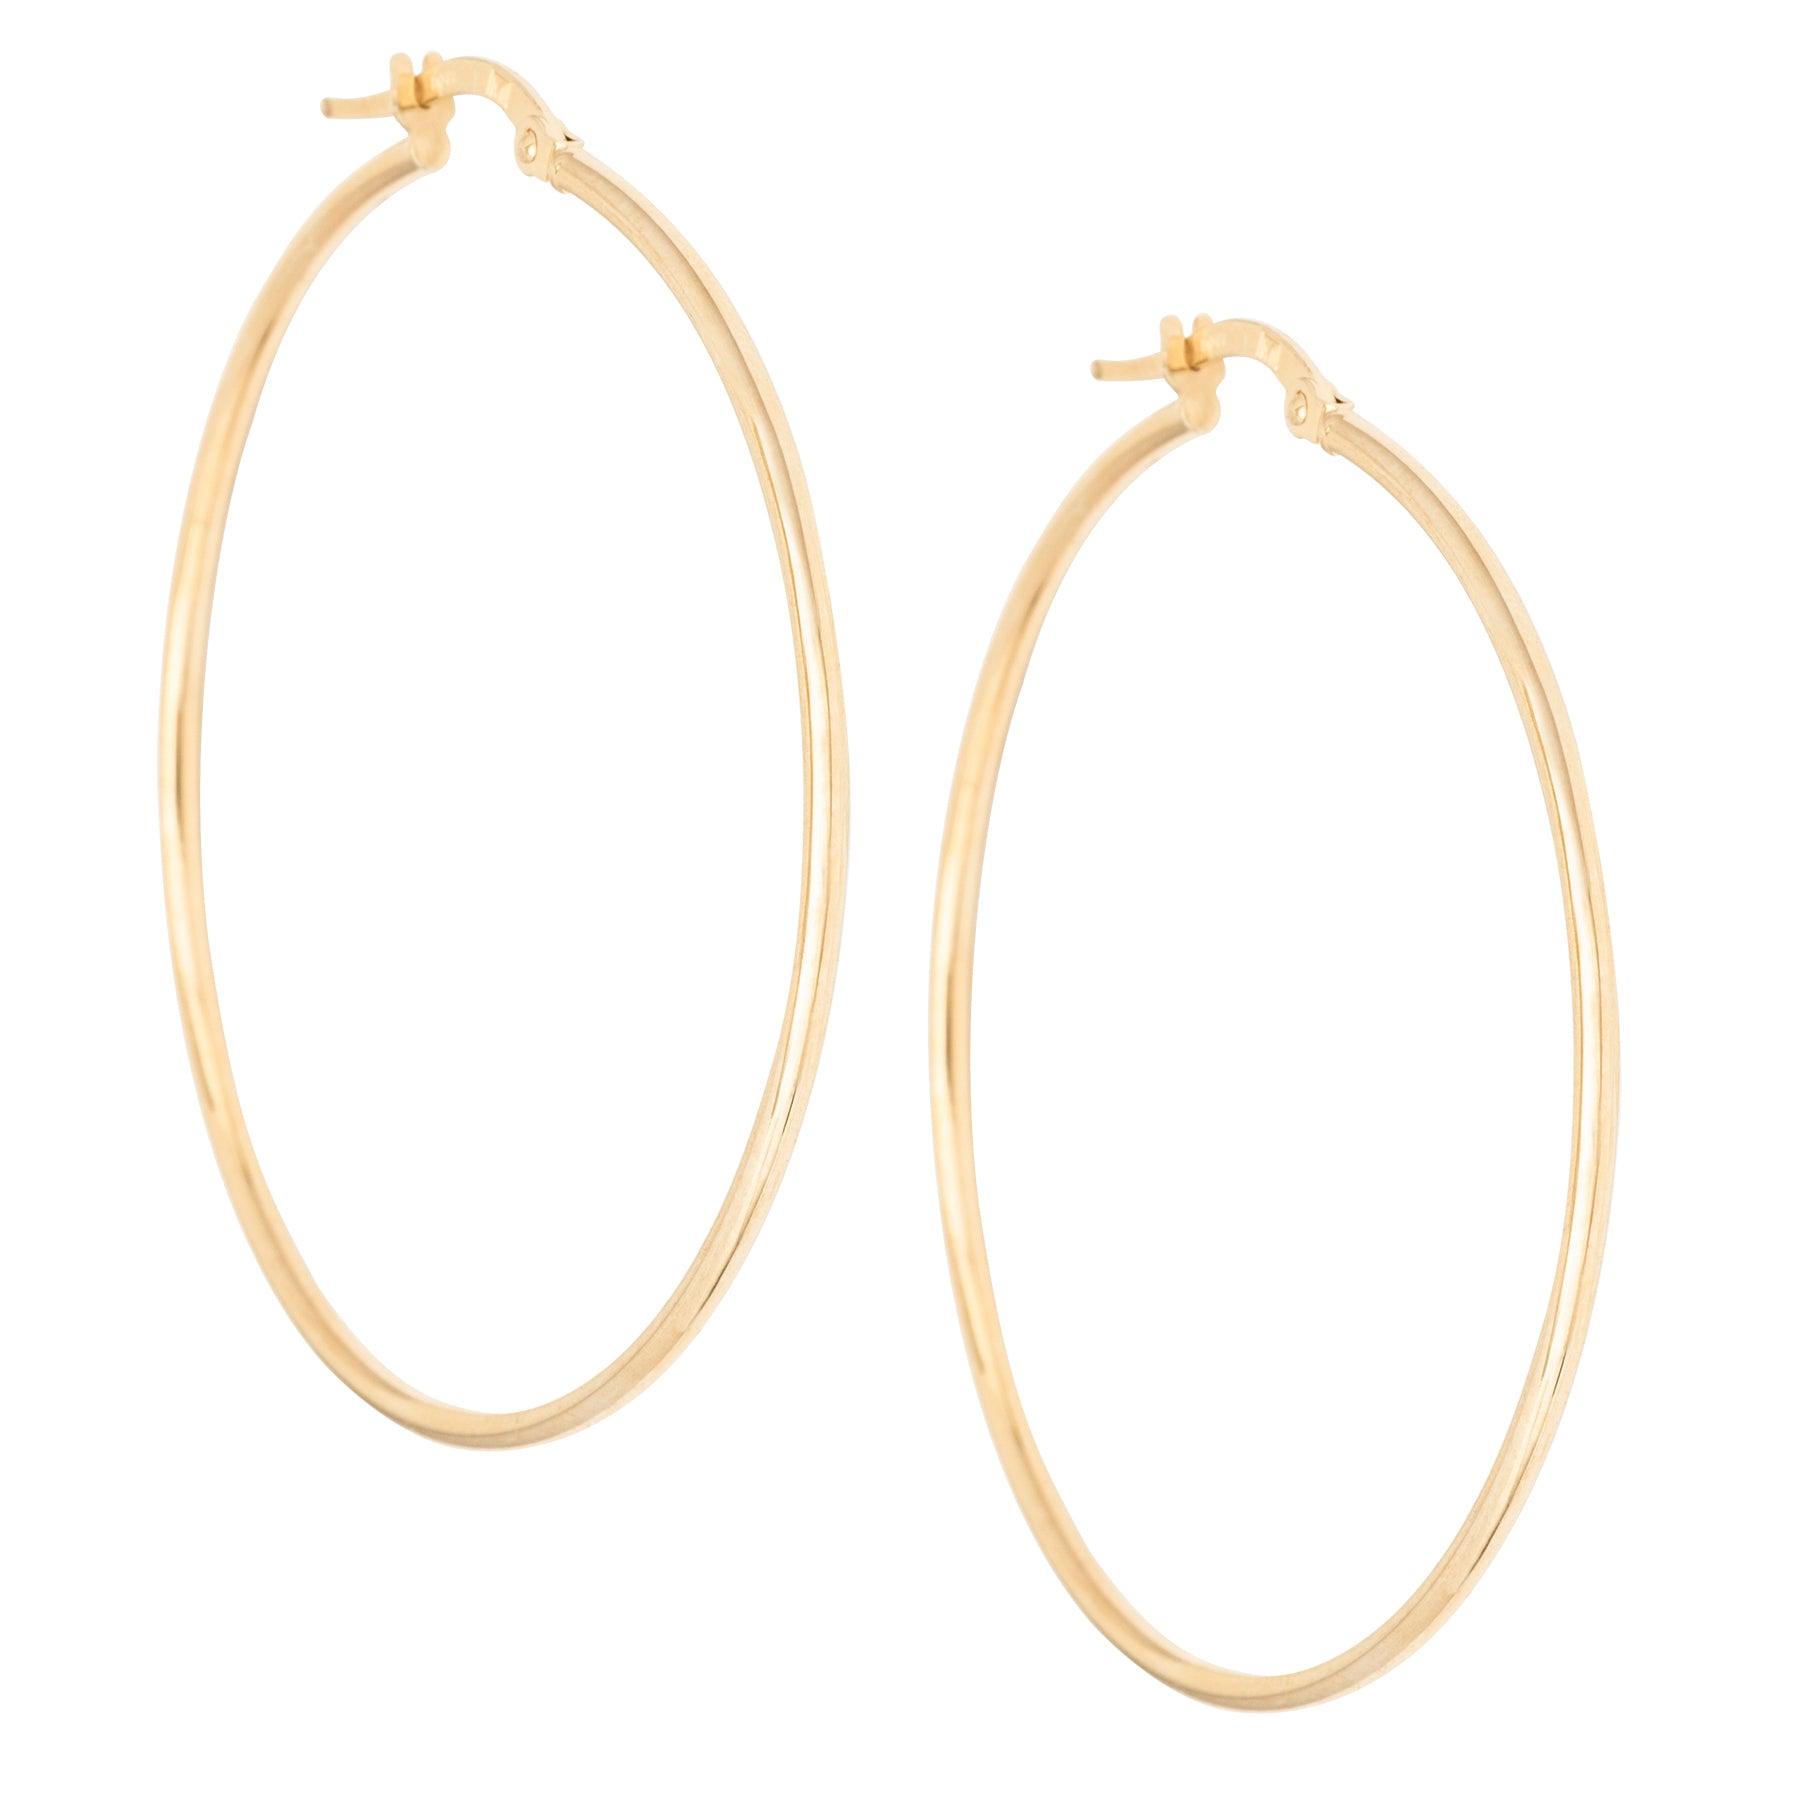 2.25" 3MM Thick Gold Hoops - Nina Segal Jewelry